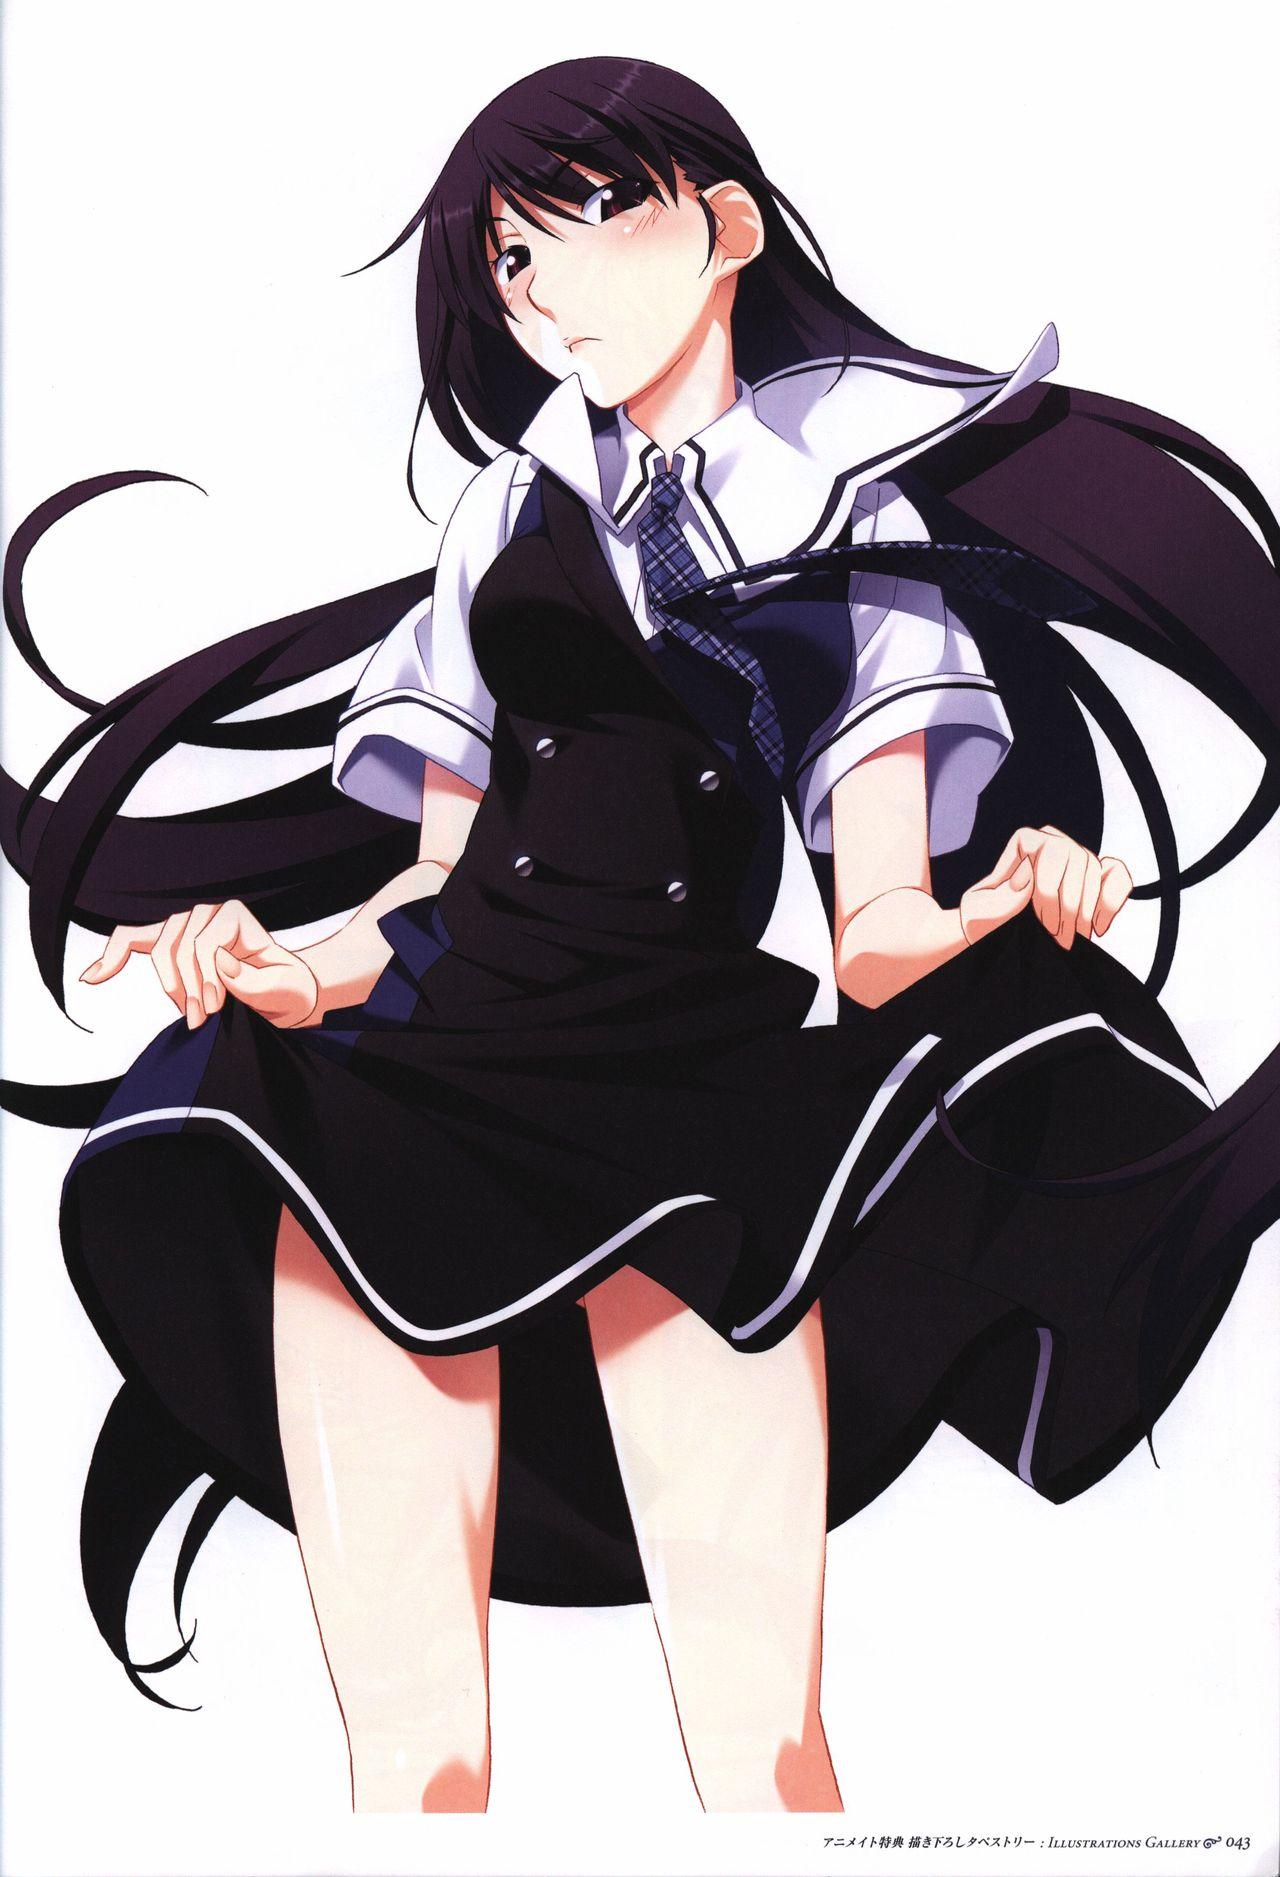 The Fruit of Grisaia Visual FanBook 43